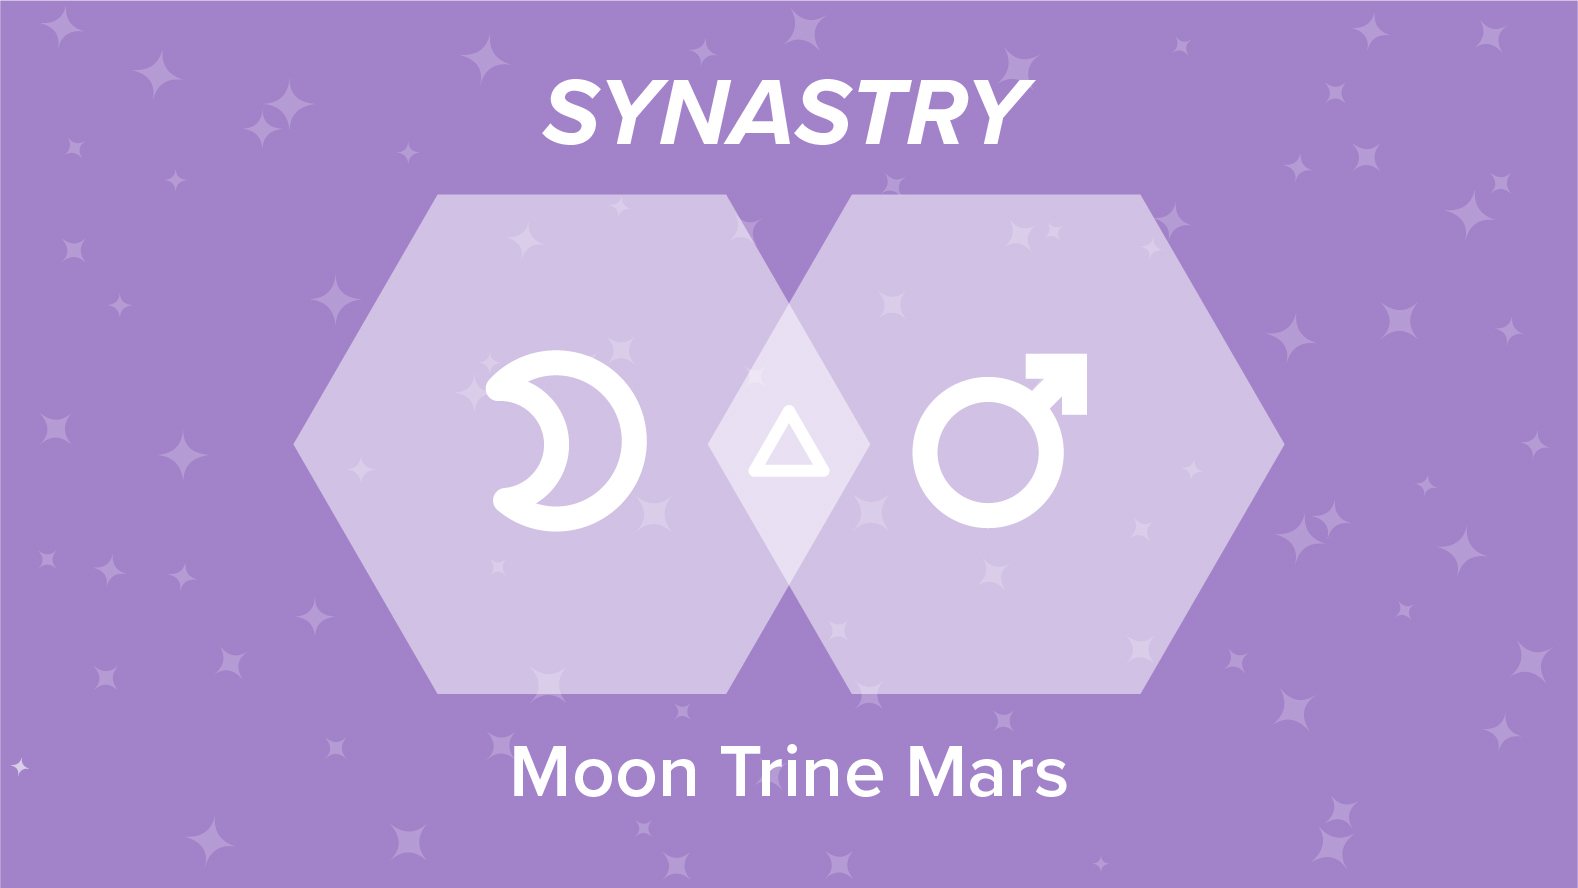 Moon Trine Mars Synastry: Relationships and Friendships Explained